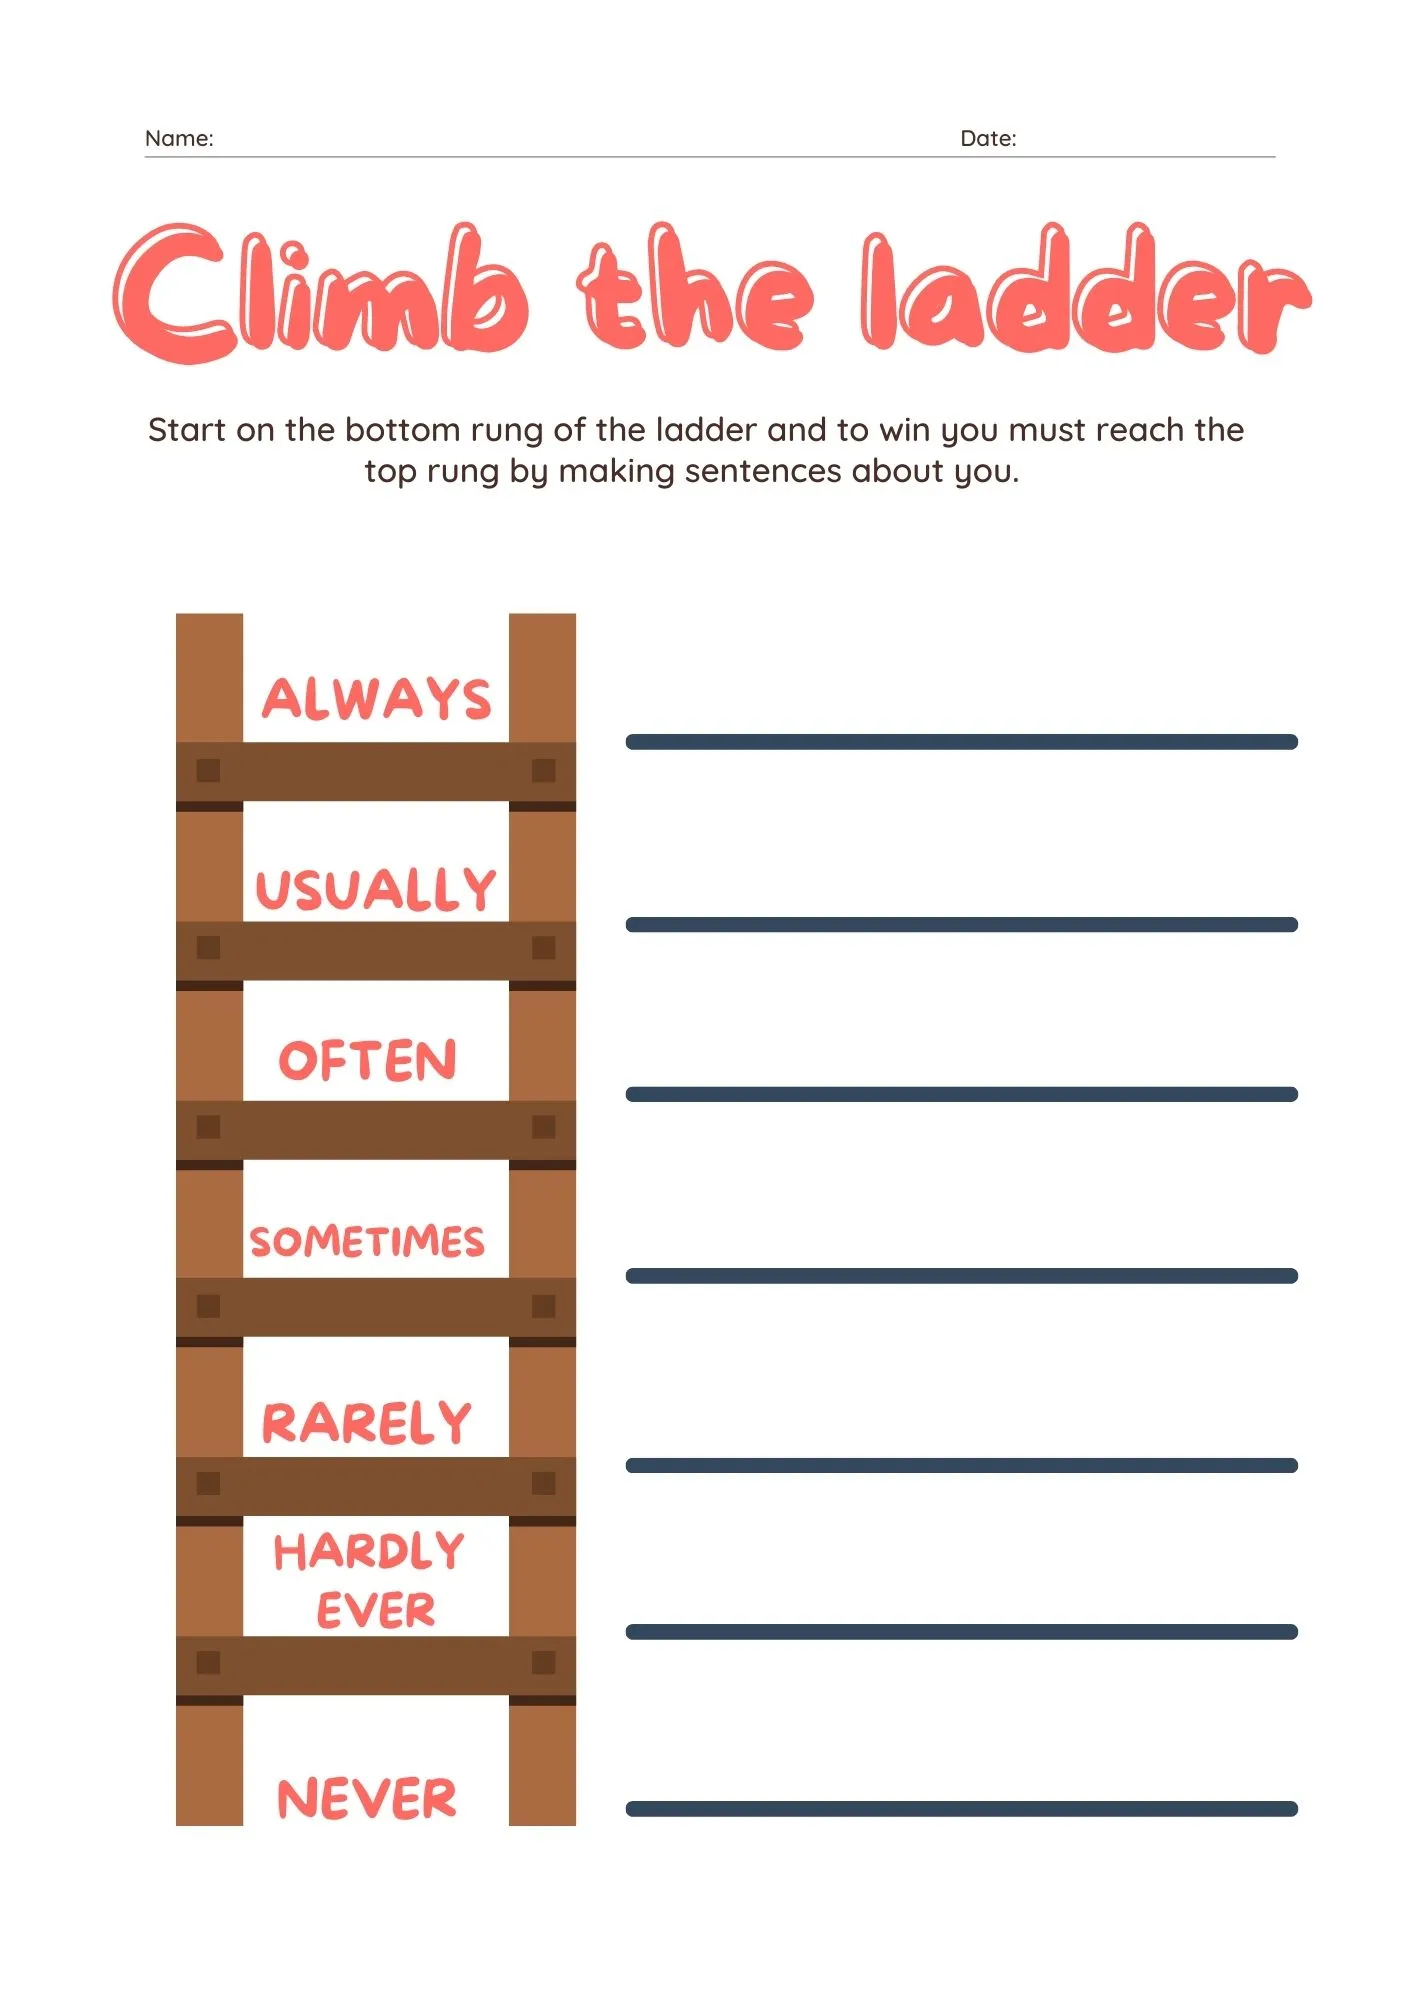 Climb the ladder - Adverbs of frequency